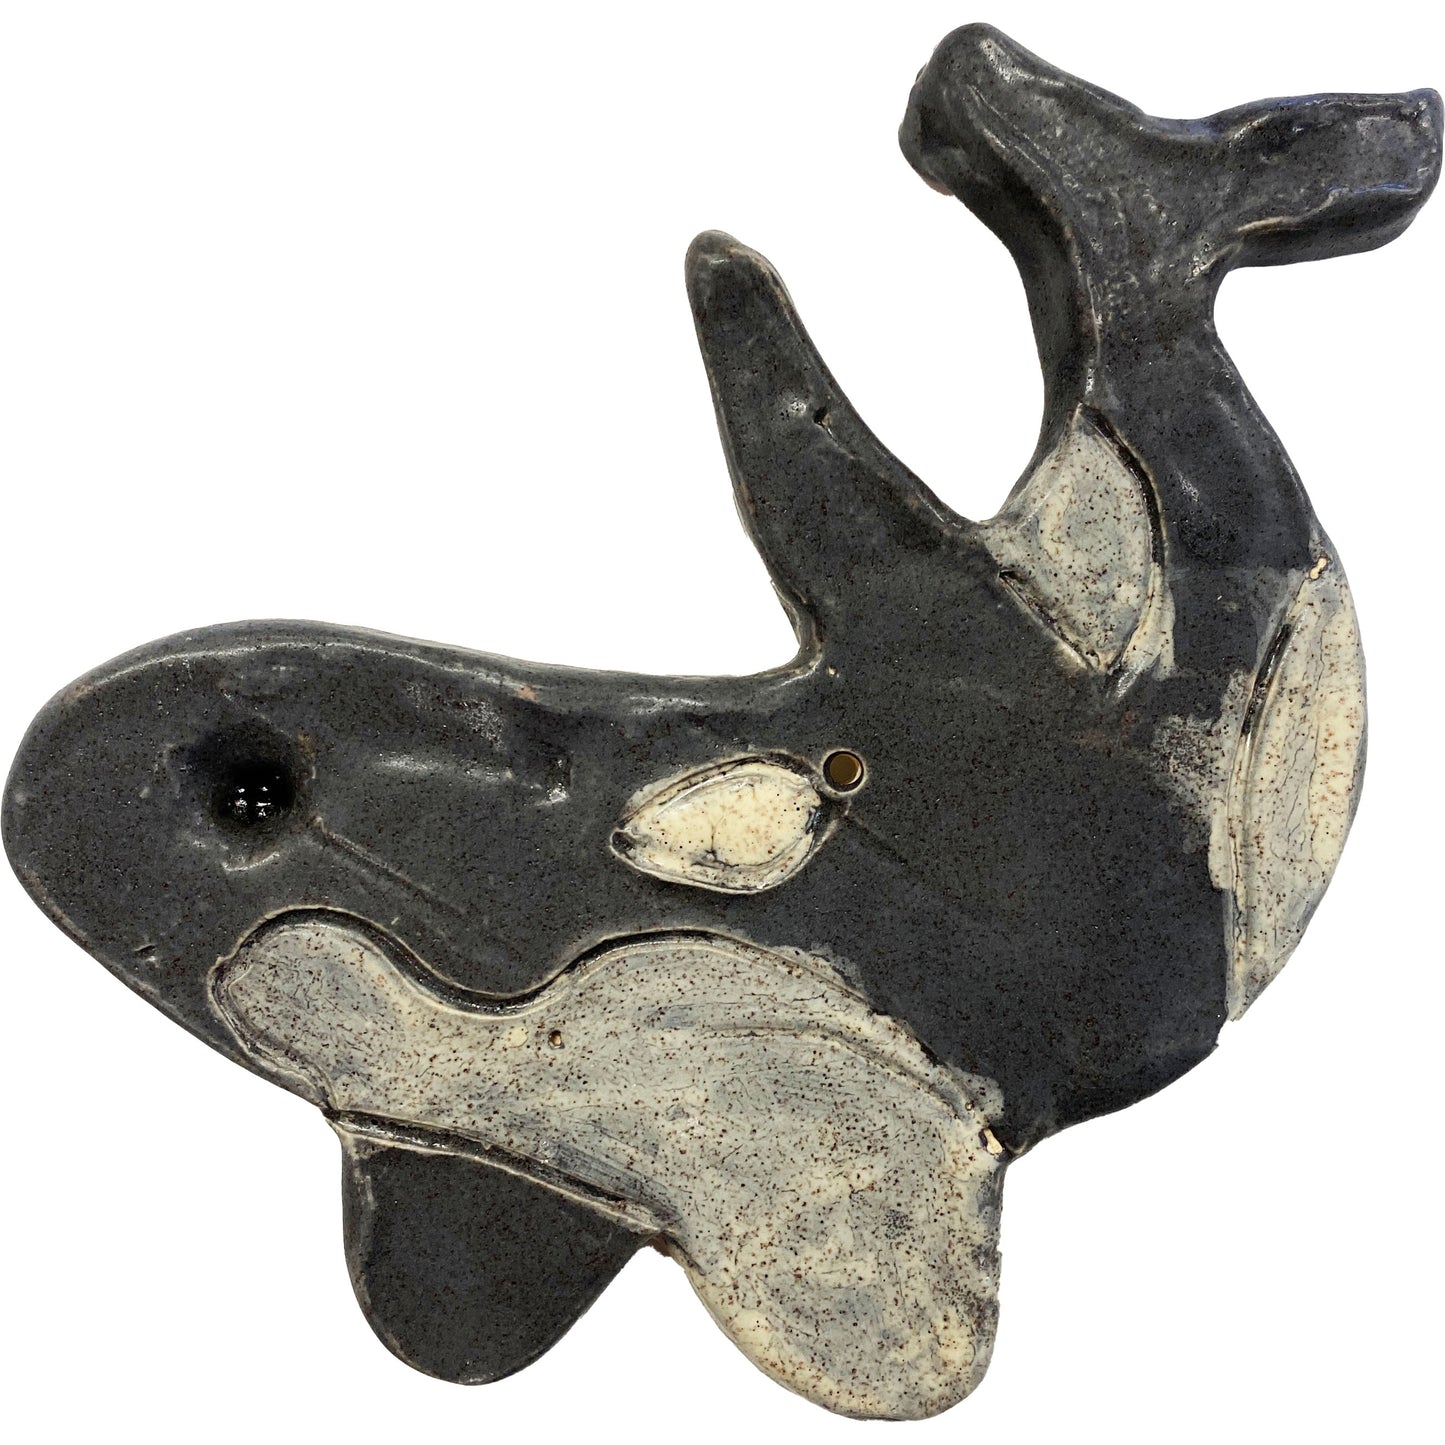 Ceramic Arts Handmade Clay Crafts Fresh Fish Glazed 6-inch x 6-inch Whale made by Emily Knoles